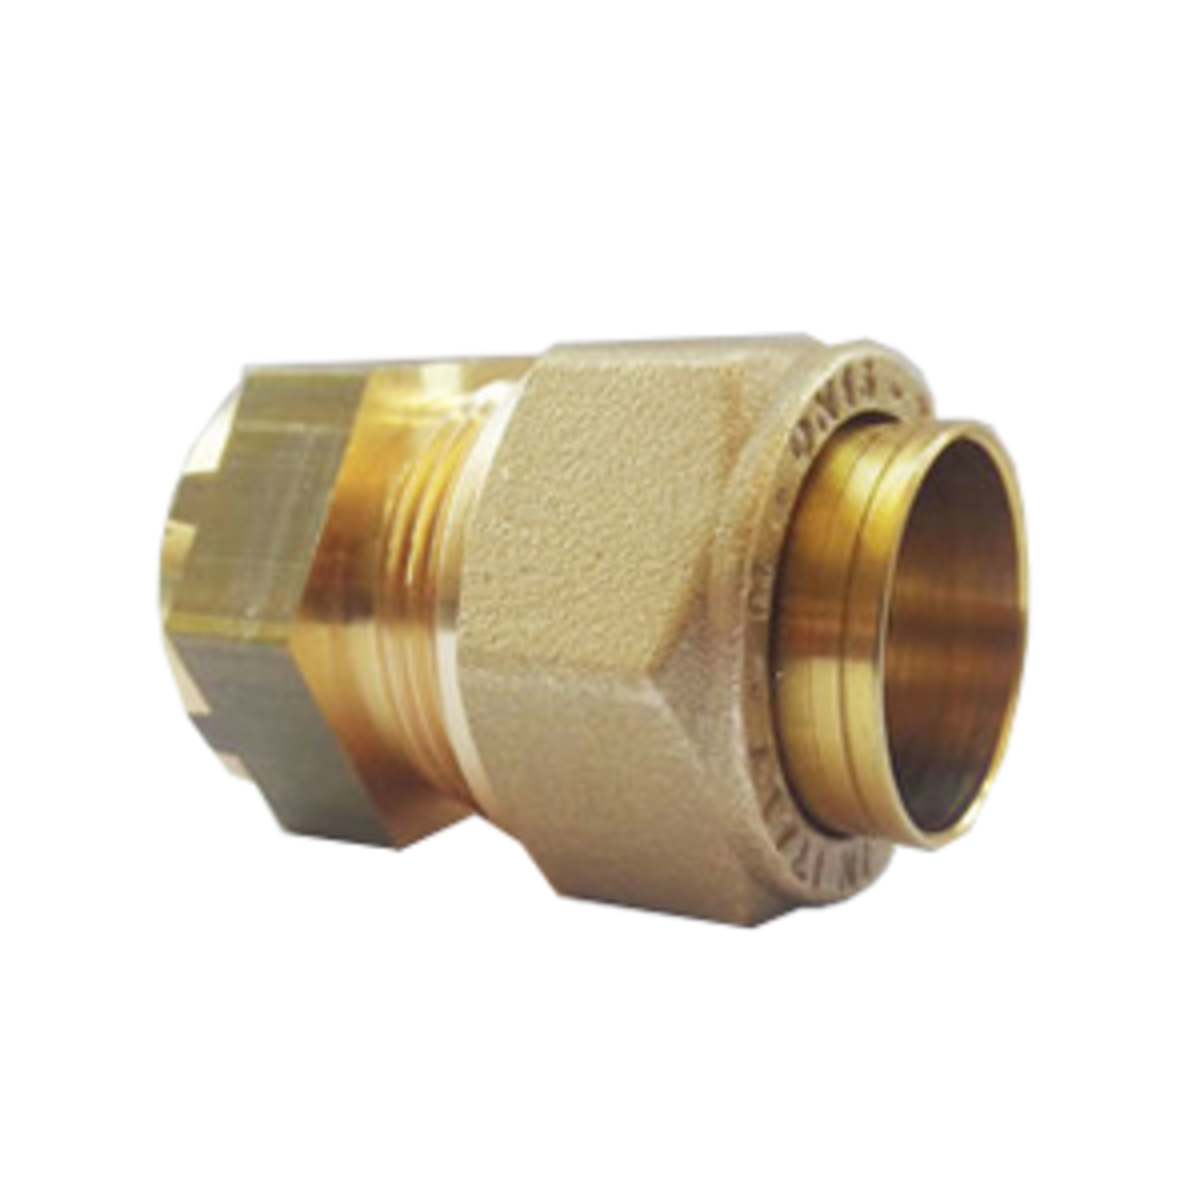 Austroflex Easy Tight FX push-in fitting Ø 16 threaded connection 3/4 F